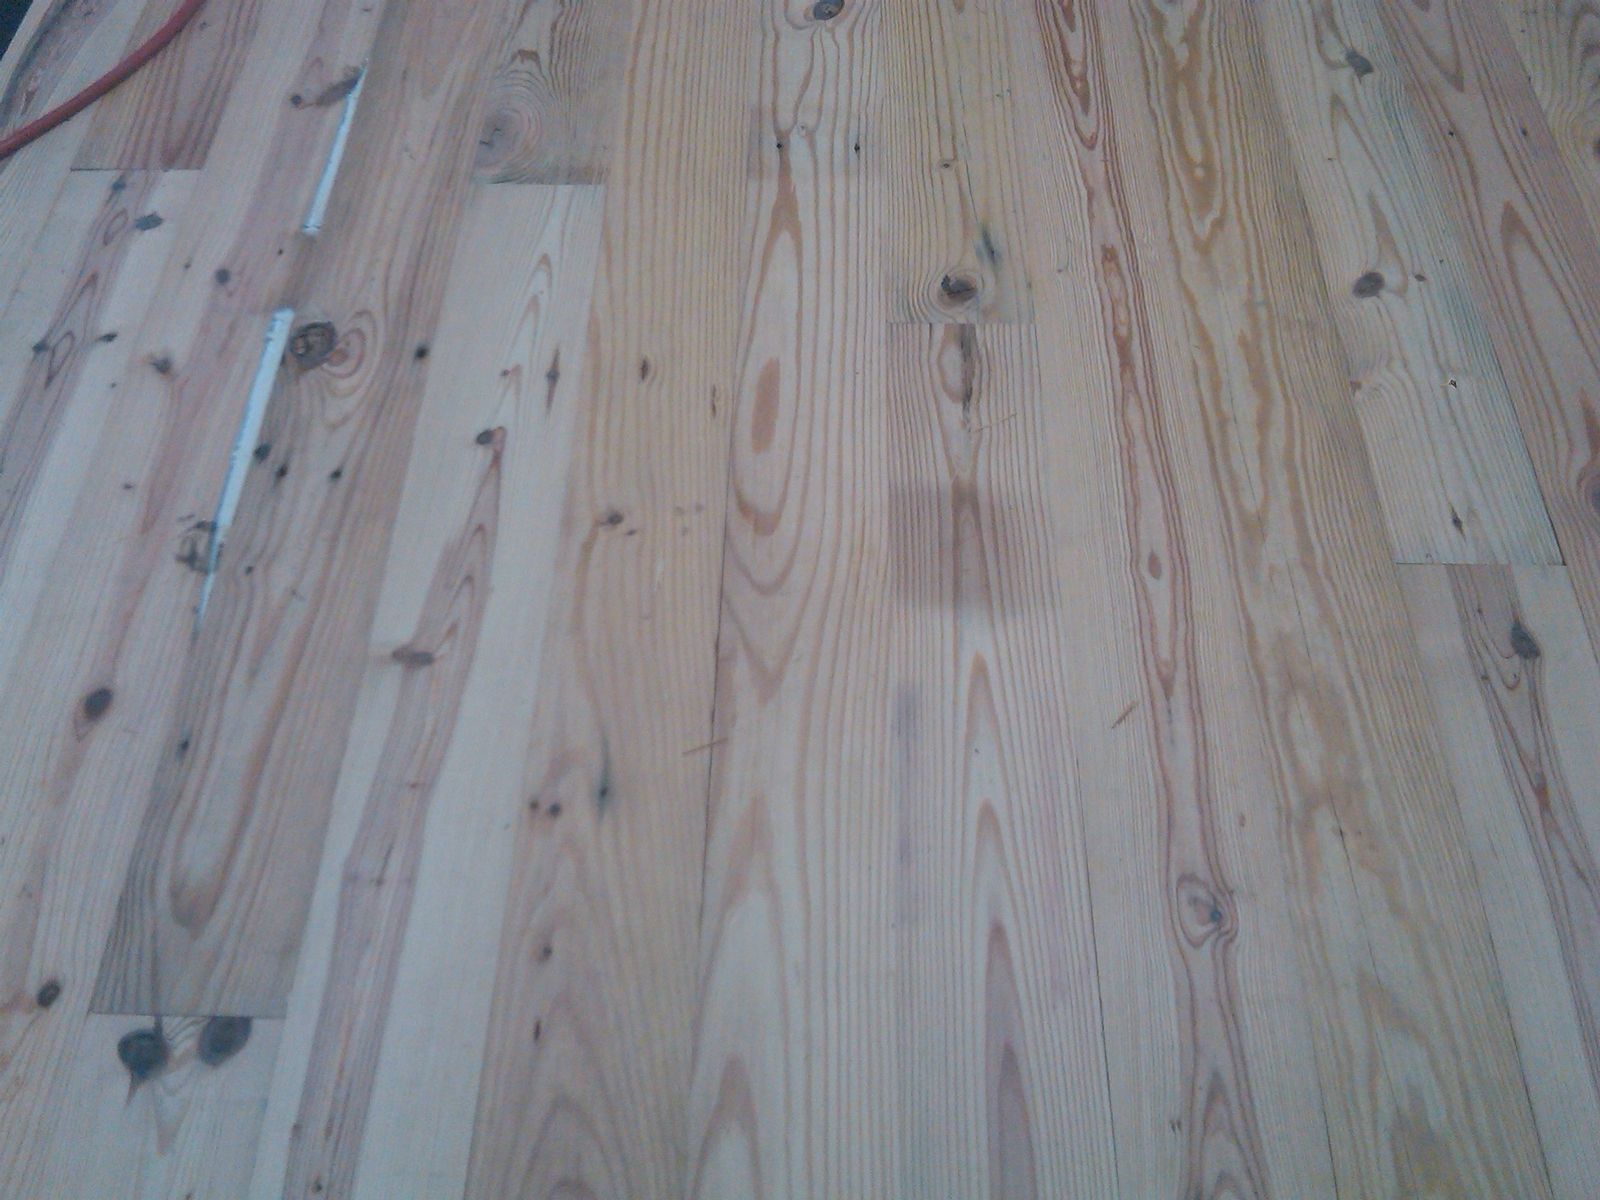 Hand Crafted Antique Pine Flooring By Reclaimed Wood Creations Inc